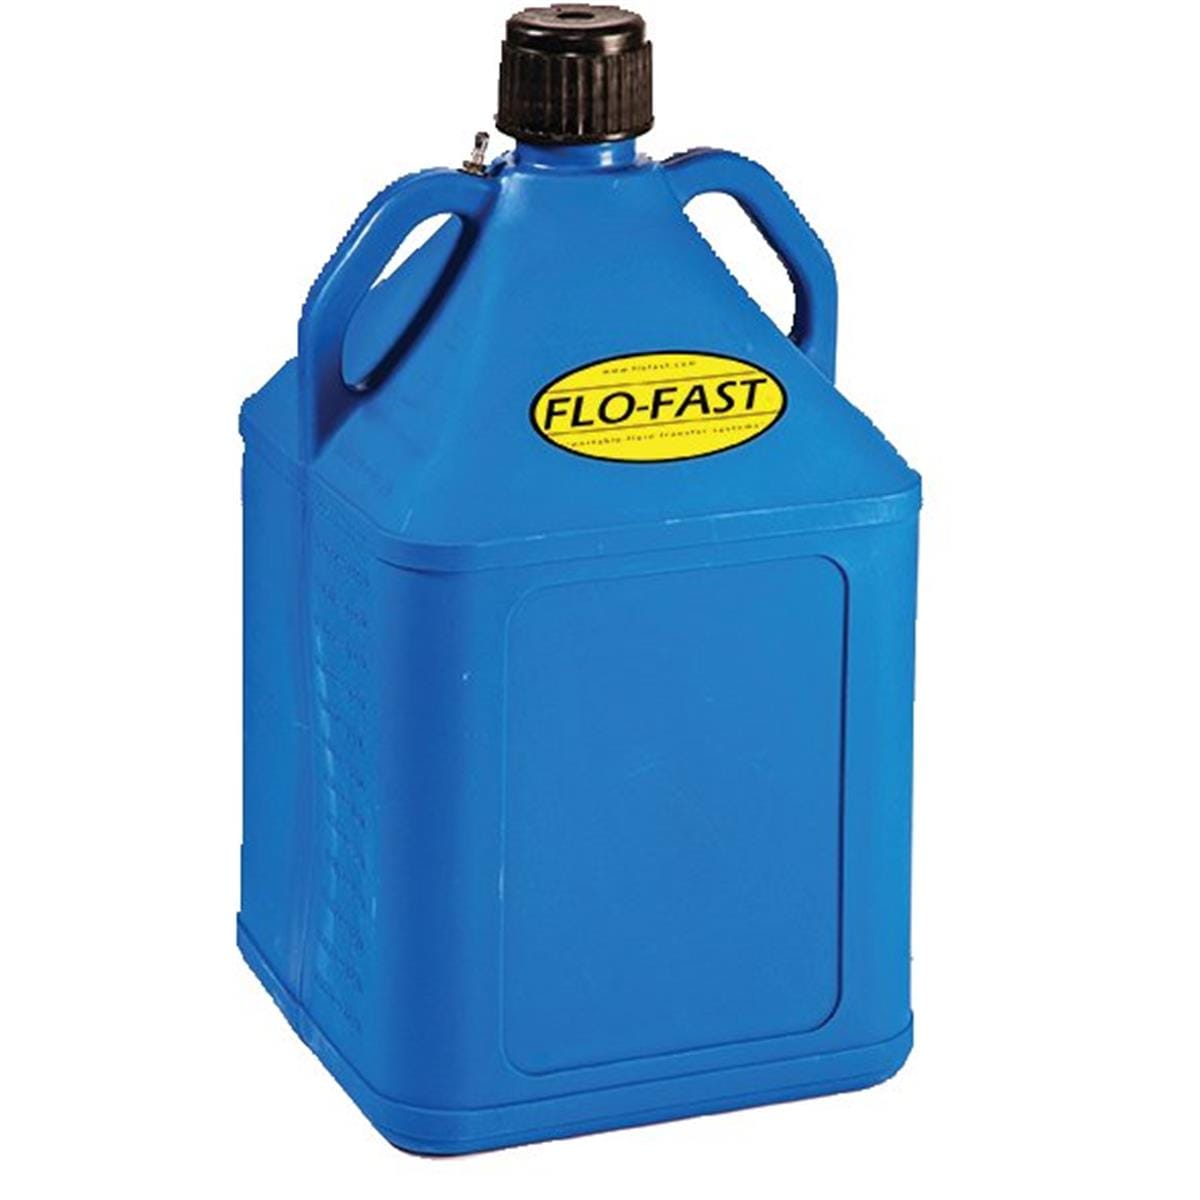 Flo-Fast™ Portable Fluid Transfer Containers